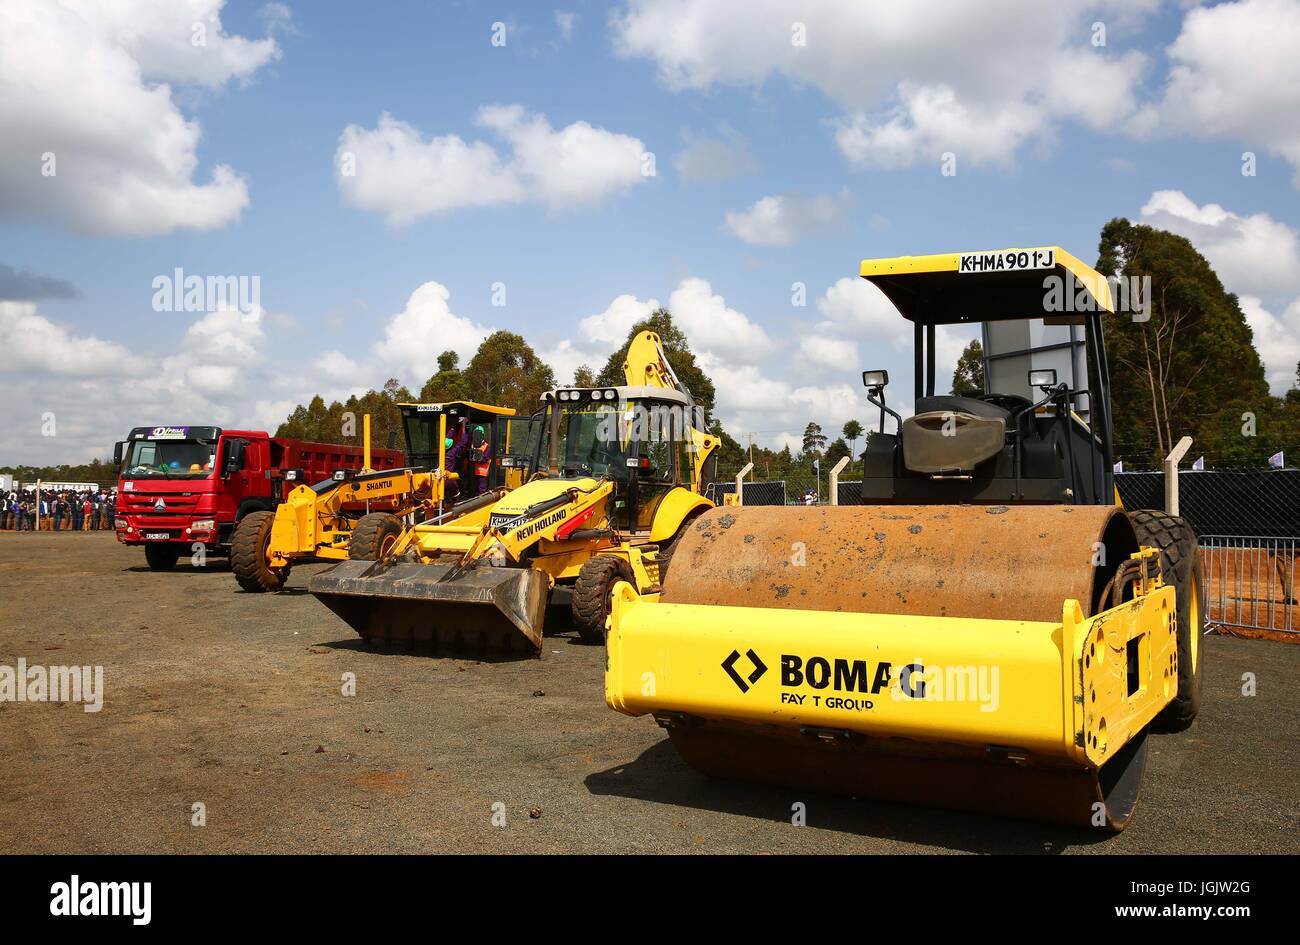 (170707) -- ELDORET(KENYA), July 7, 2017 (Xinhua) -- Construction vehicles are seen at the launching ceremony of the Special Economic Zone project in Eldoret, Kenya, on July 7, 2017. Kenya on Friday launched a Special Economic Zone (SEZ) project that is expected to attract about 2 billion U.S. dollars of foreign investments. The project is a joint venture between Kenyan-based company Africa Economic Zone and China's Guangdong New South Group. (Xinhua/Pan Siwei) Stock Photo